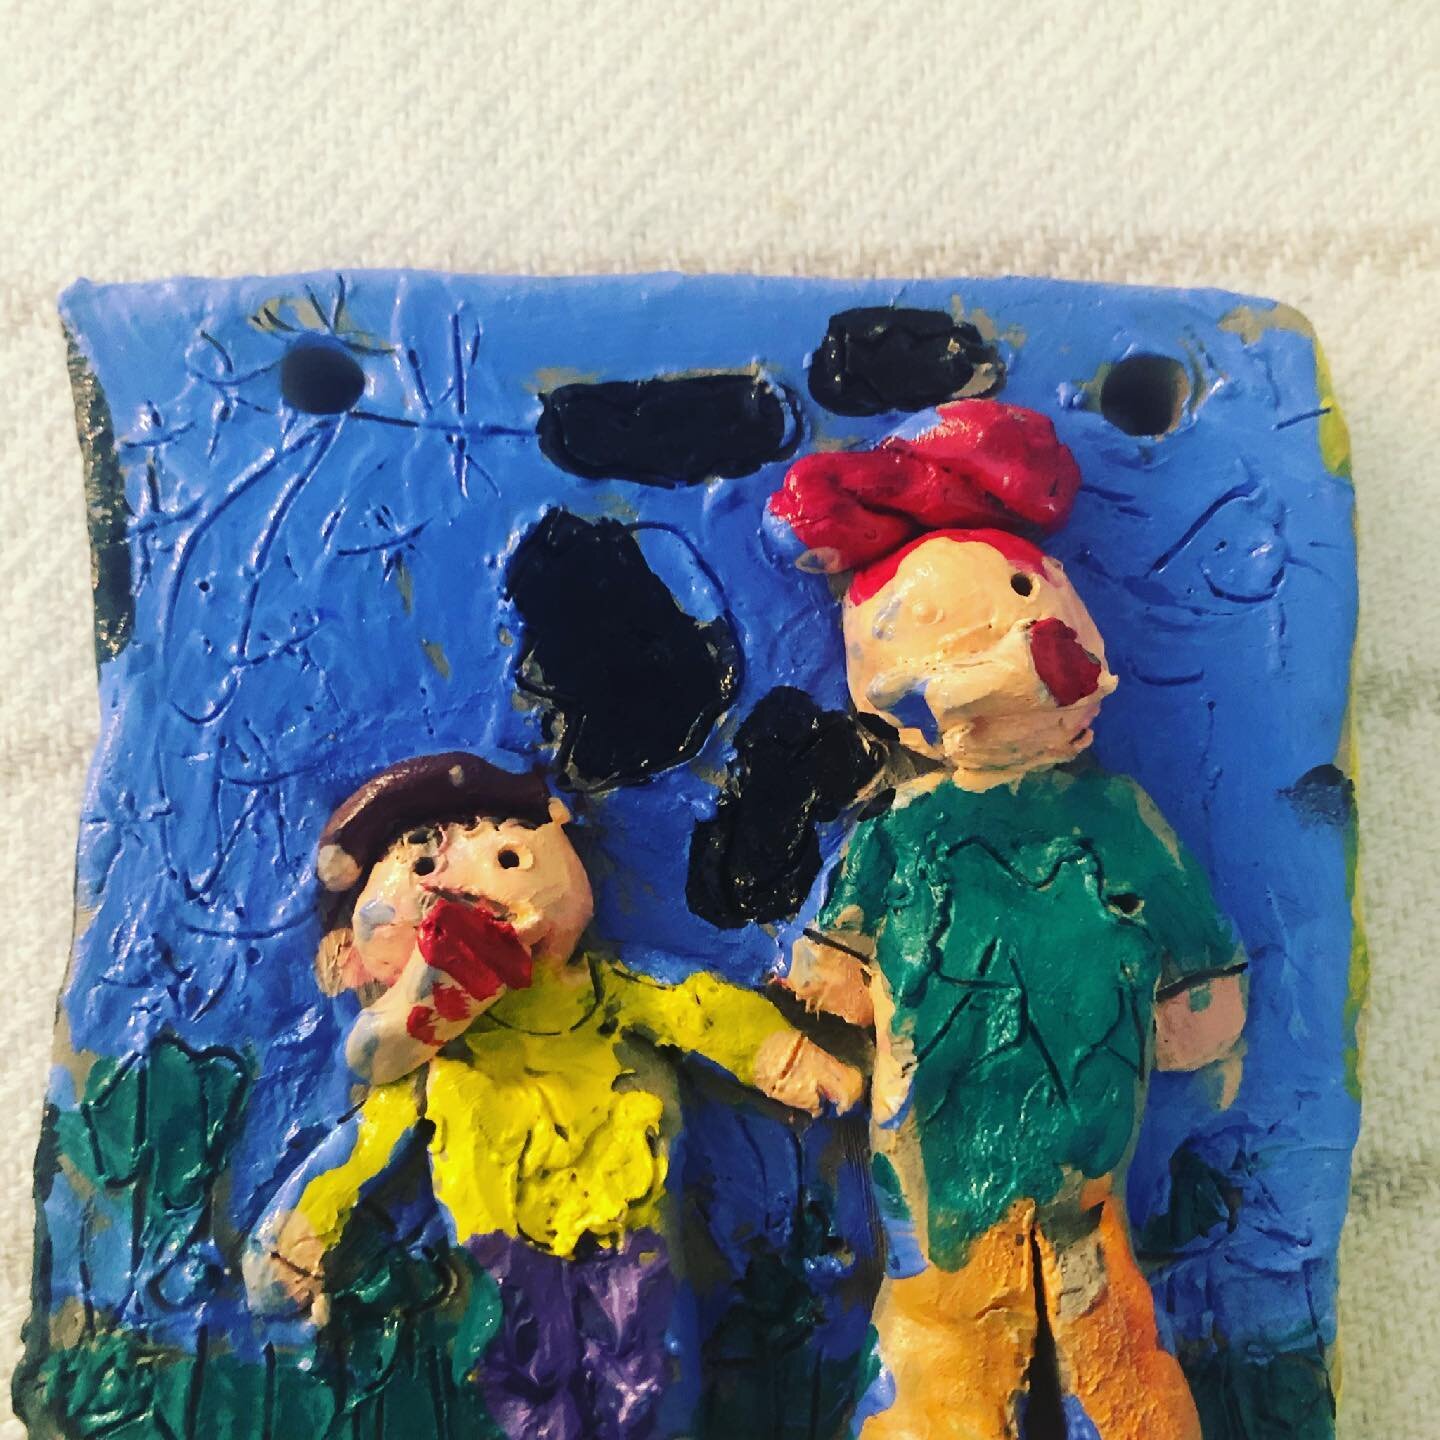 Happy Mother&rsquo;s day. 
My little guy made me this at school, we are eating Stromboli&rsquo;s together outside. 
This is being a mom from the eyes of  child. Holding hands, being outside and eating a favourite meal made by mum. 
He loves that it h